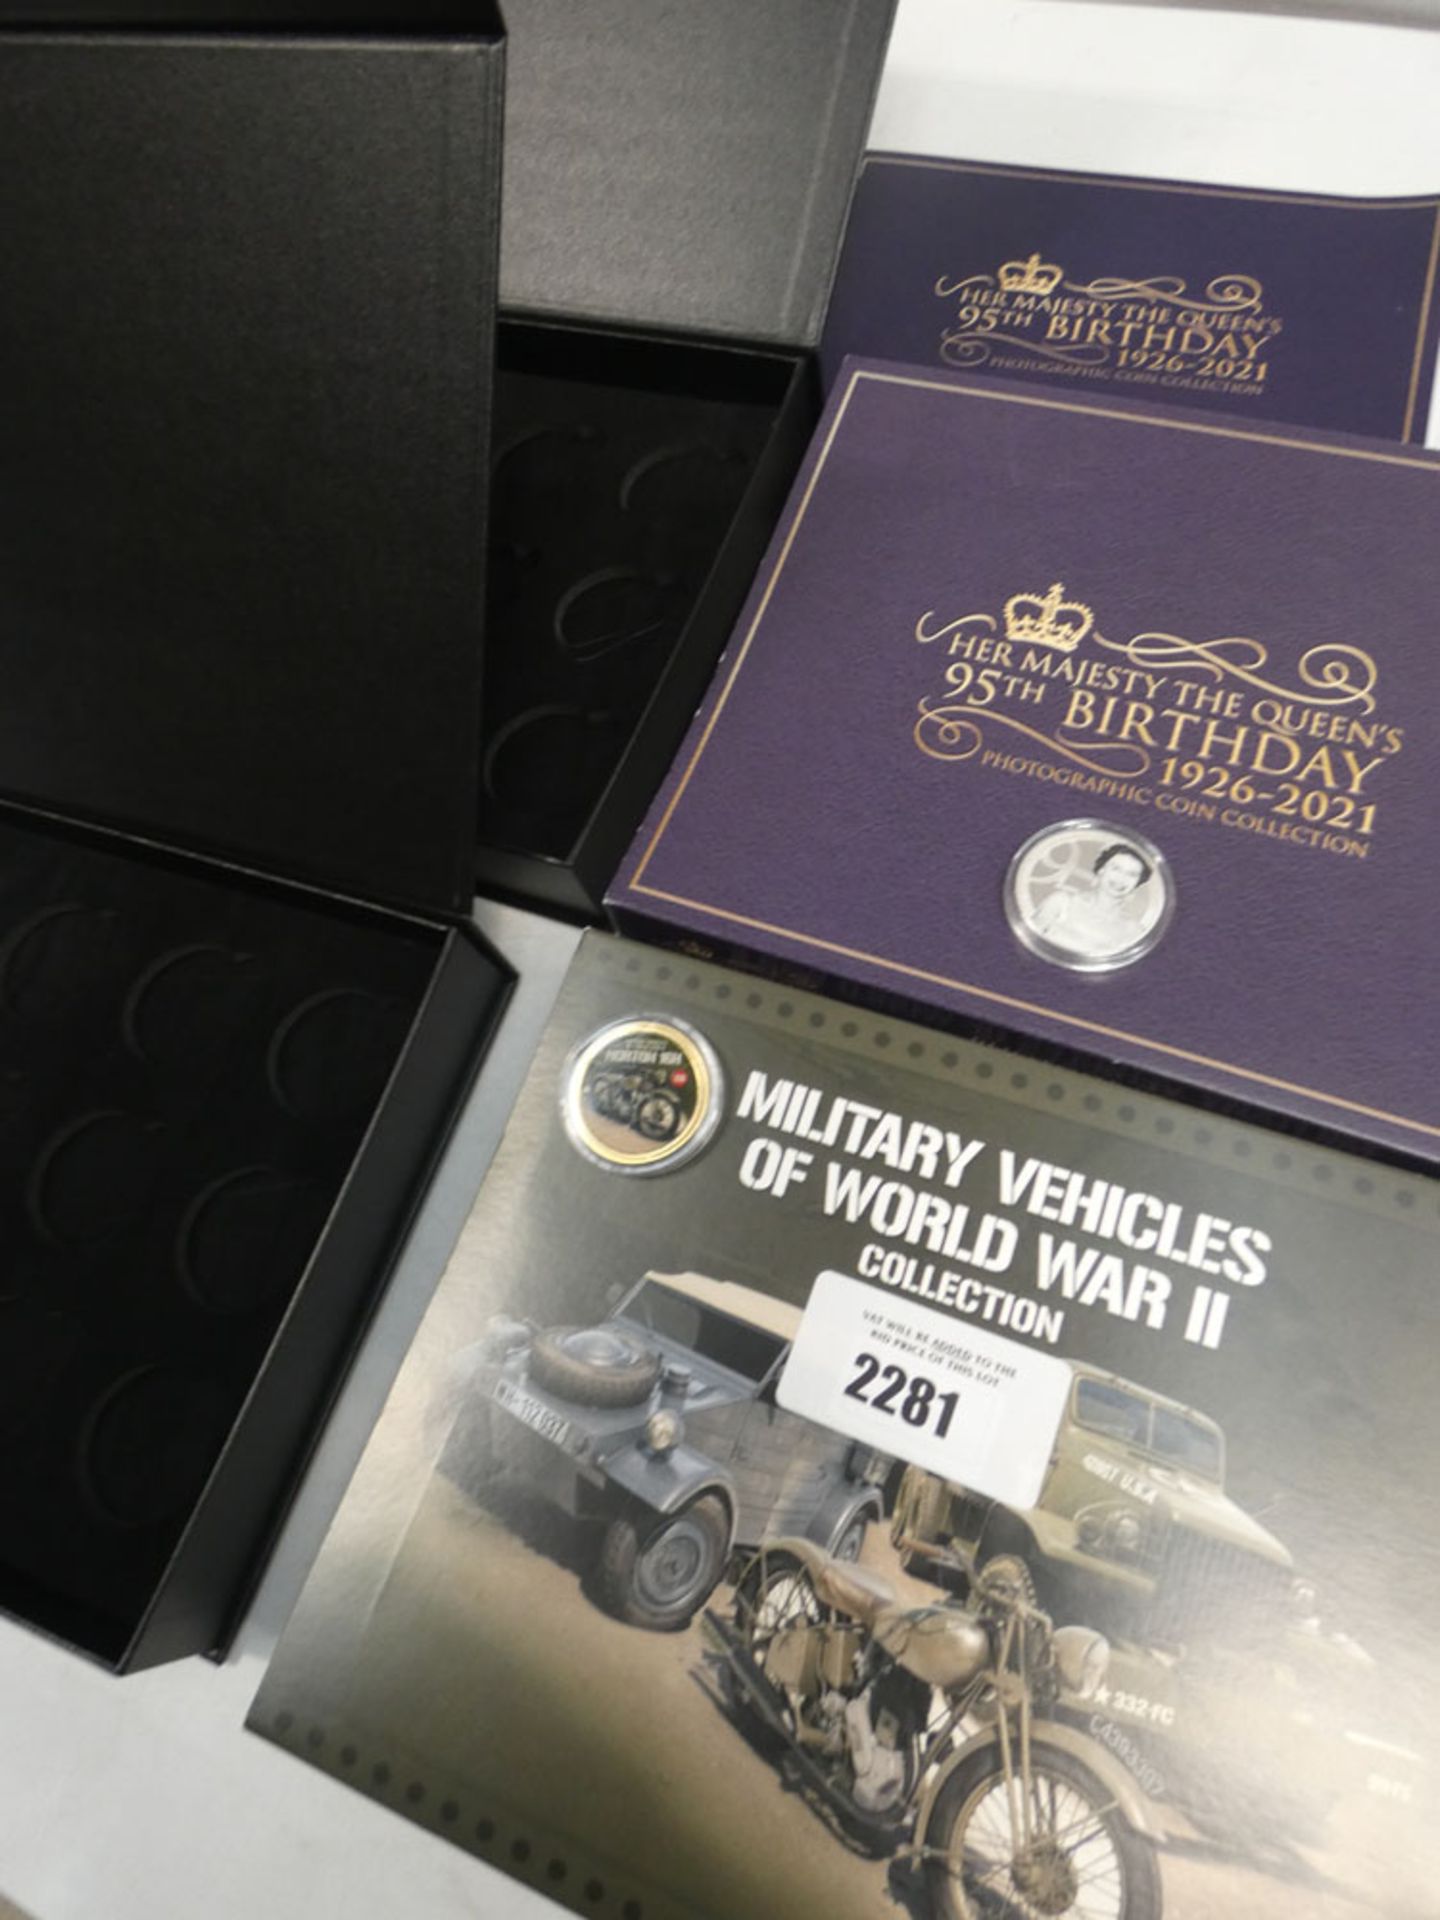 Military Vehicles of World War II and Queens 95th Birthday photographic coin collection starter sets